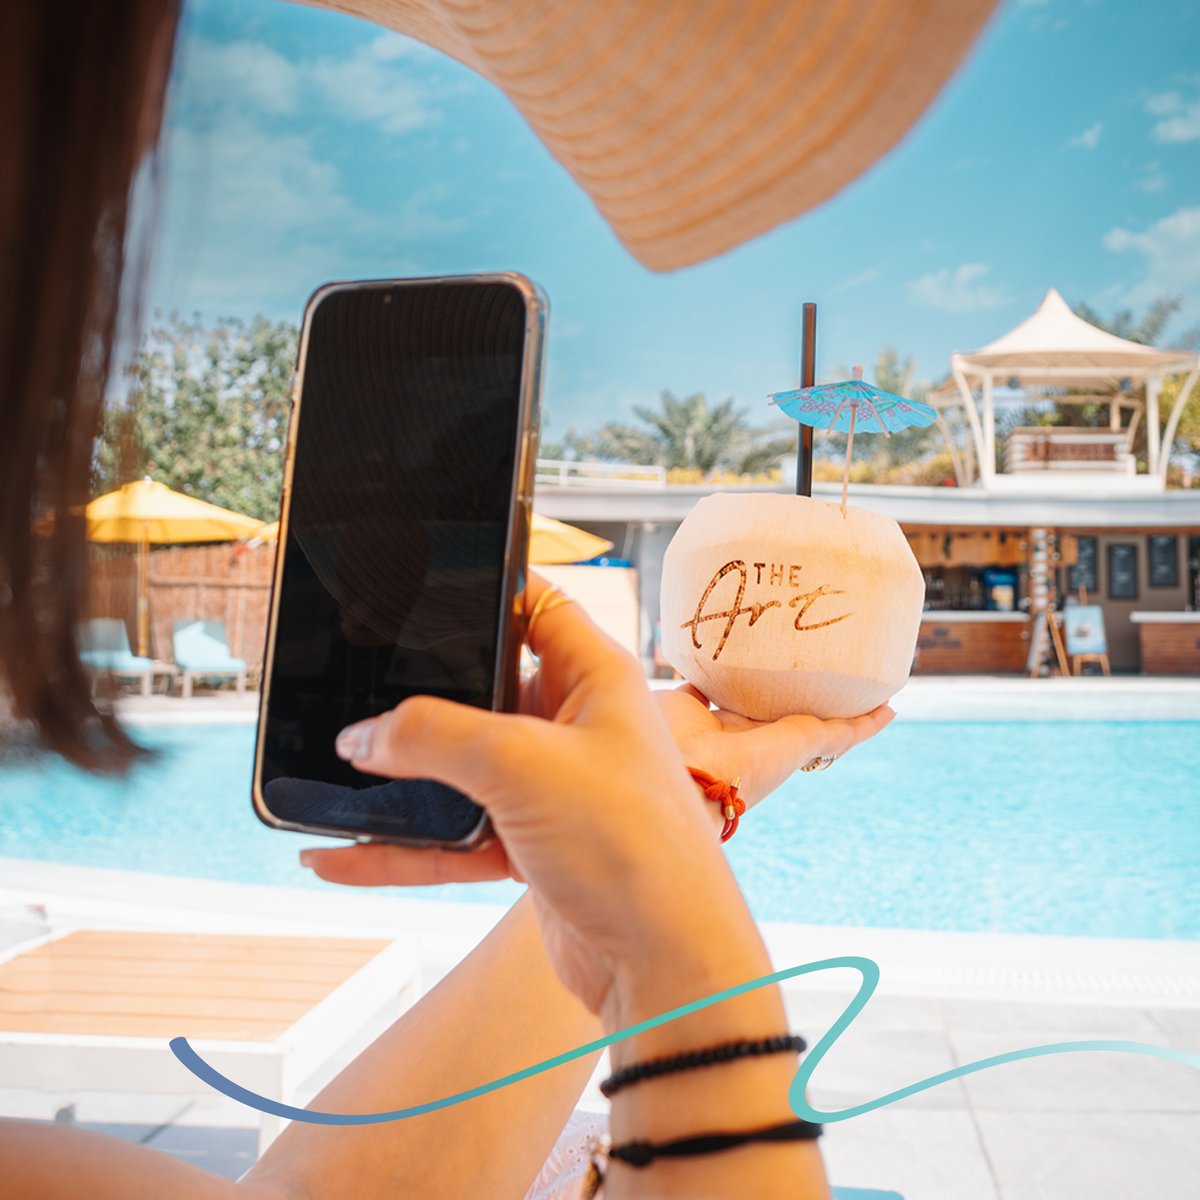 Take a break from the heat and unwind poolside with a refreshing drink in hand. 

This summer, treat yourself to a relaxing escape and soak up the sun in style. It's time to make the most of your leisure time!

#TheArtHotel #ArtMoments #CoconutWater